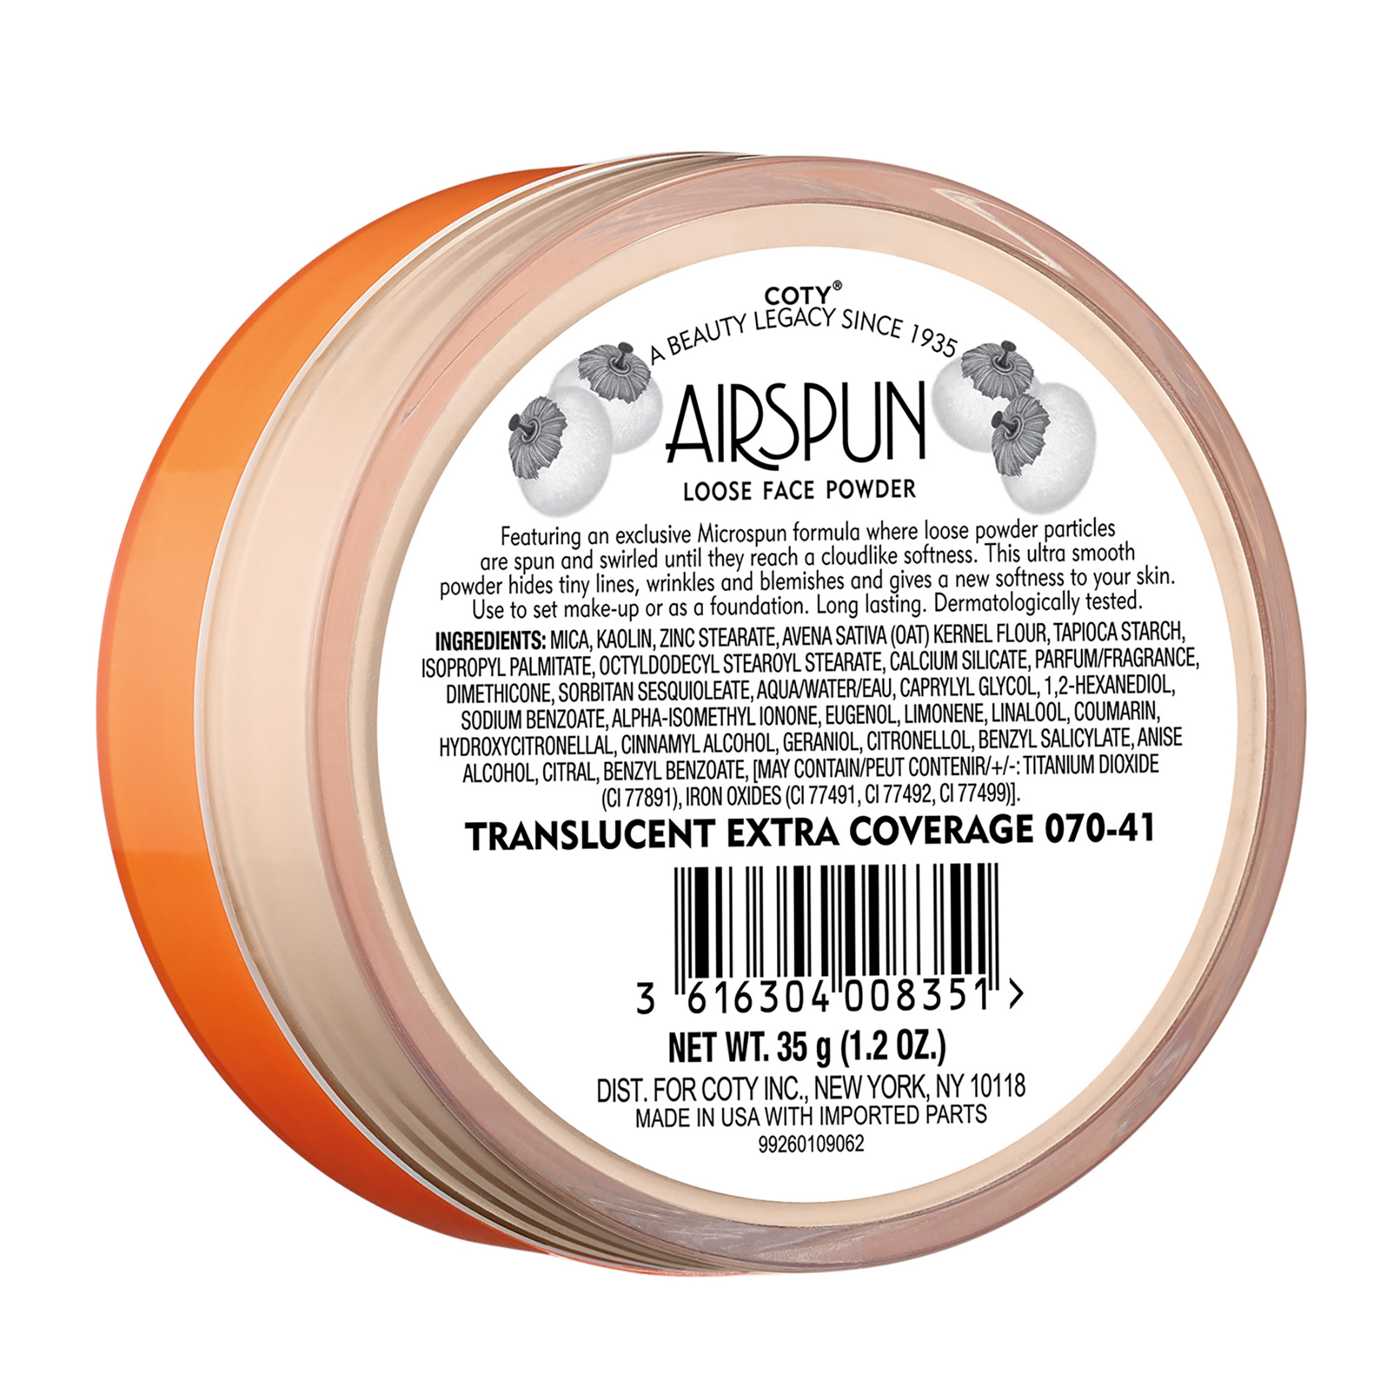 Coty Airspun Loose Face Powder - Translucent Extra Coverage; image 5 of 6